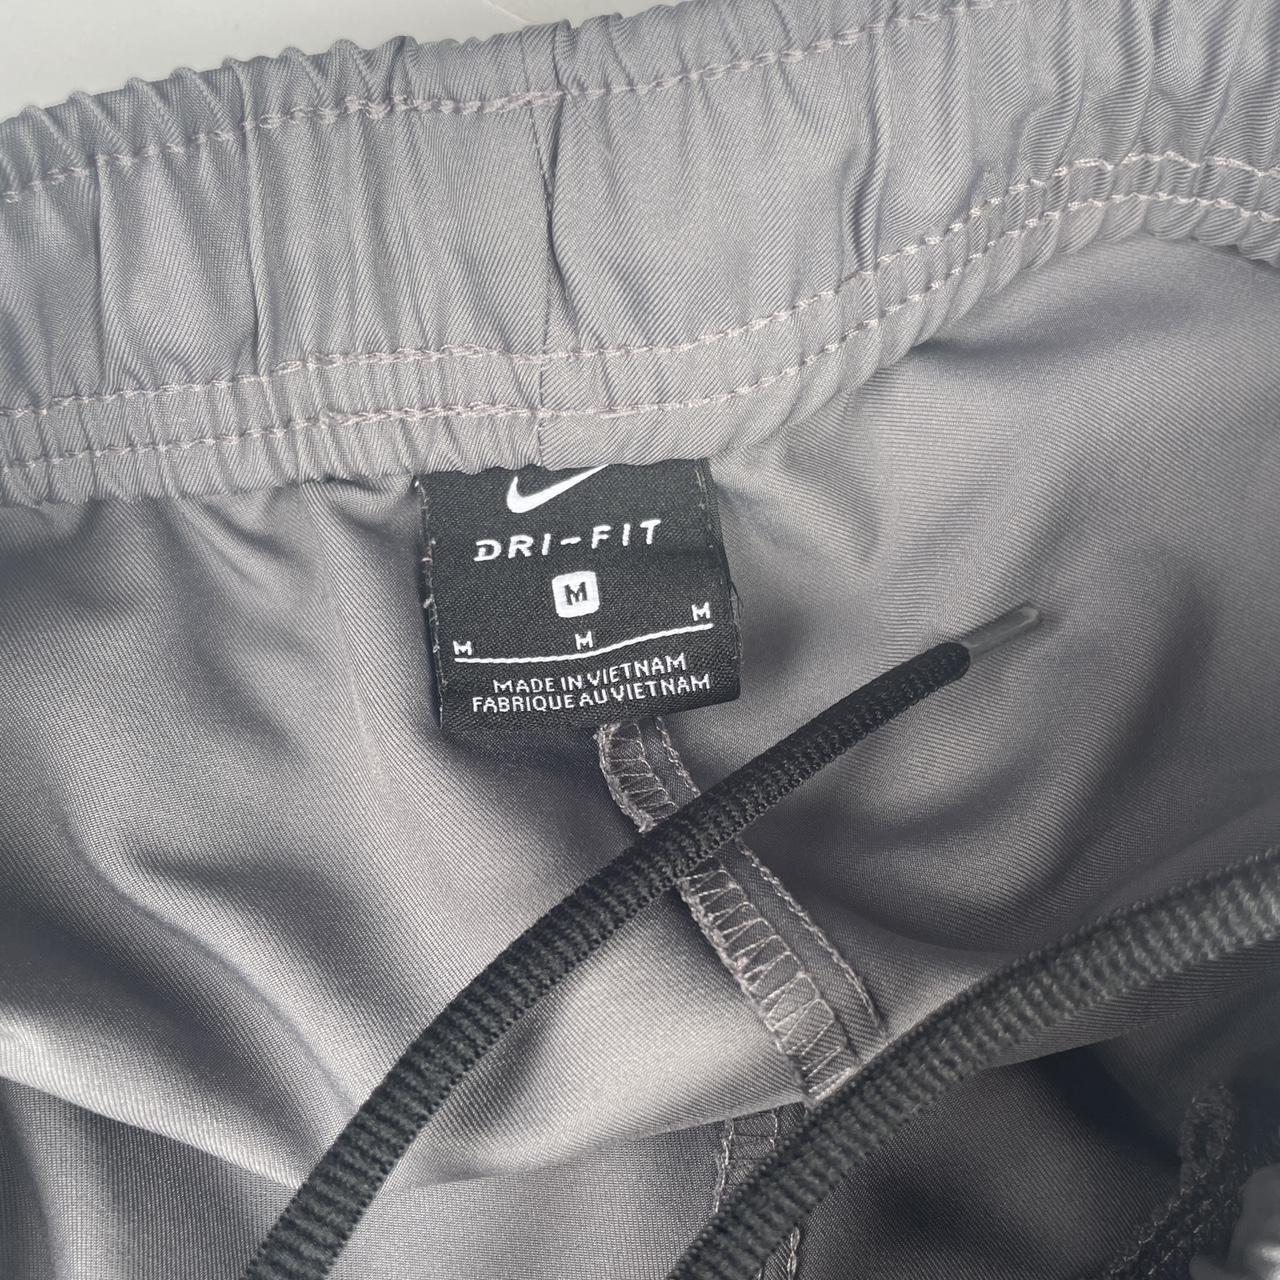 Nike Athletic Sweatpants Open To All Offers ... - Depop